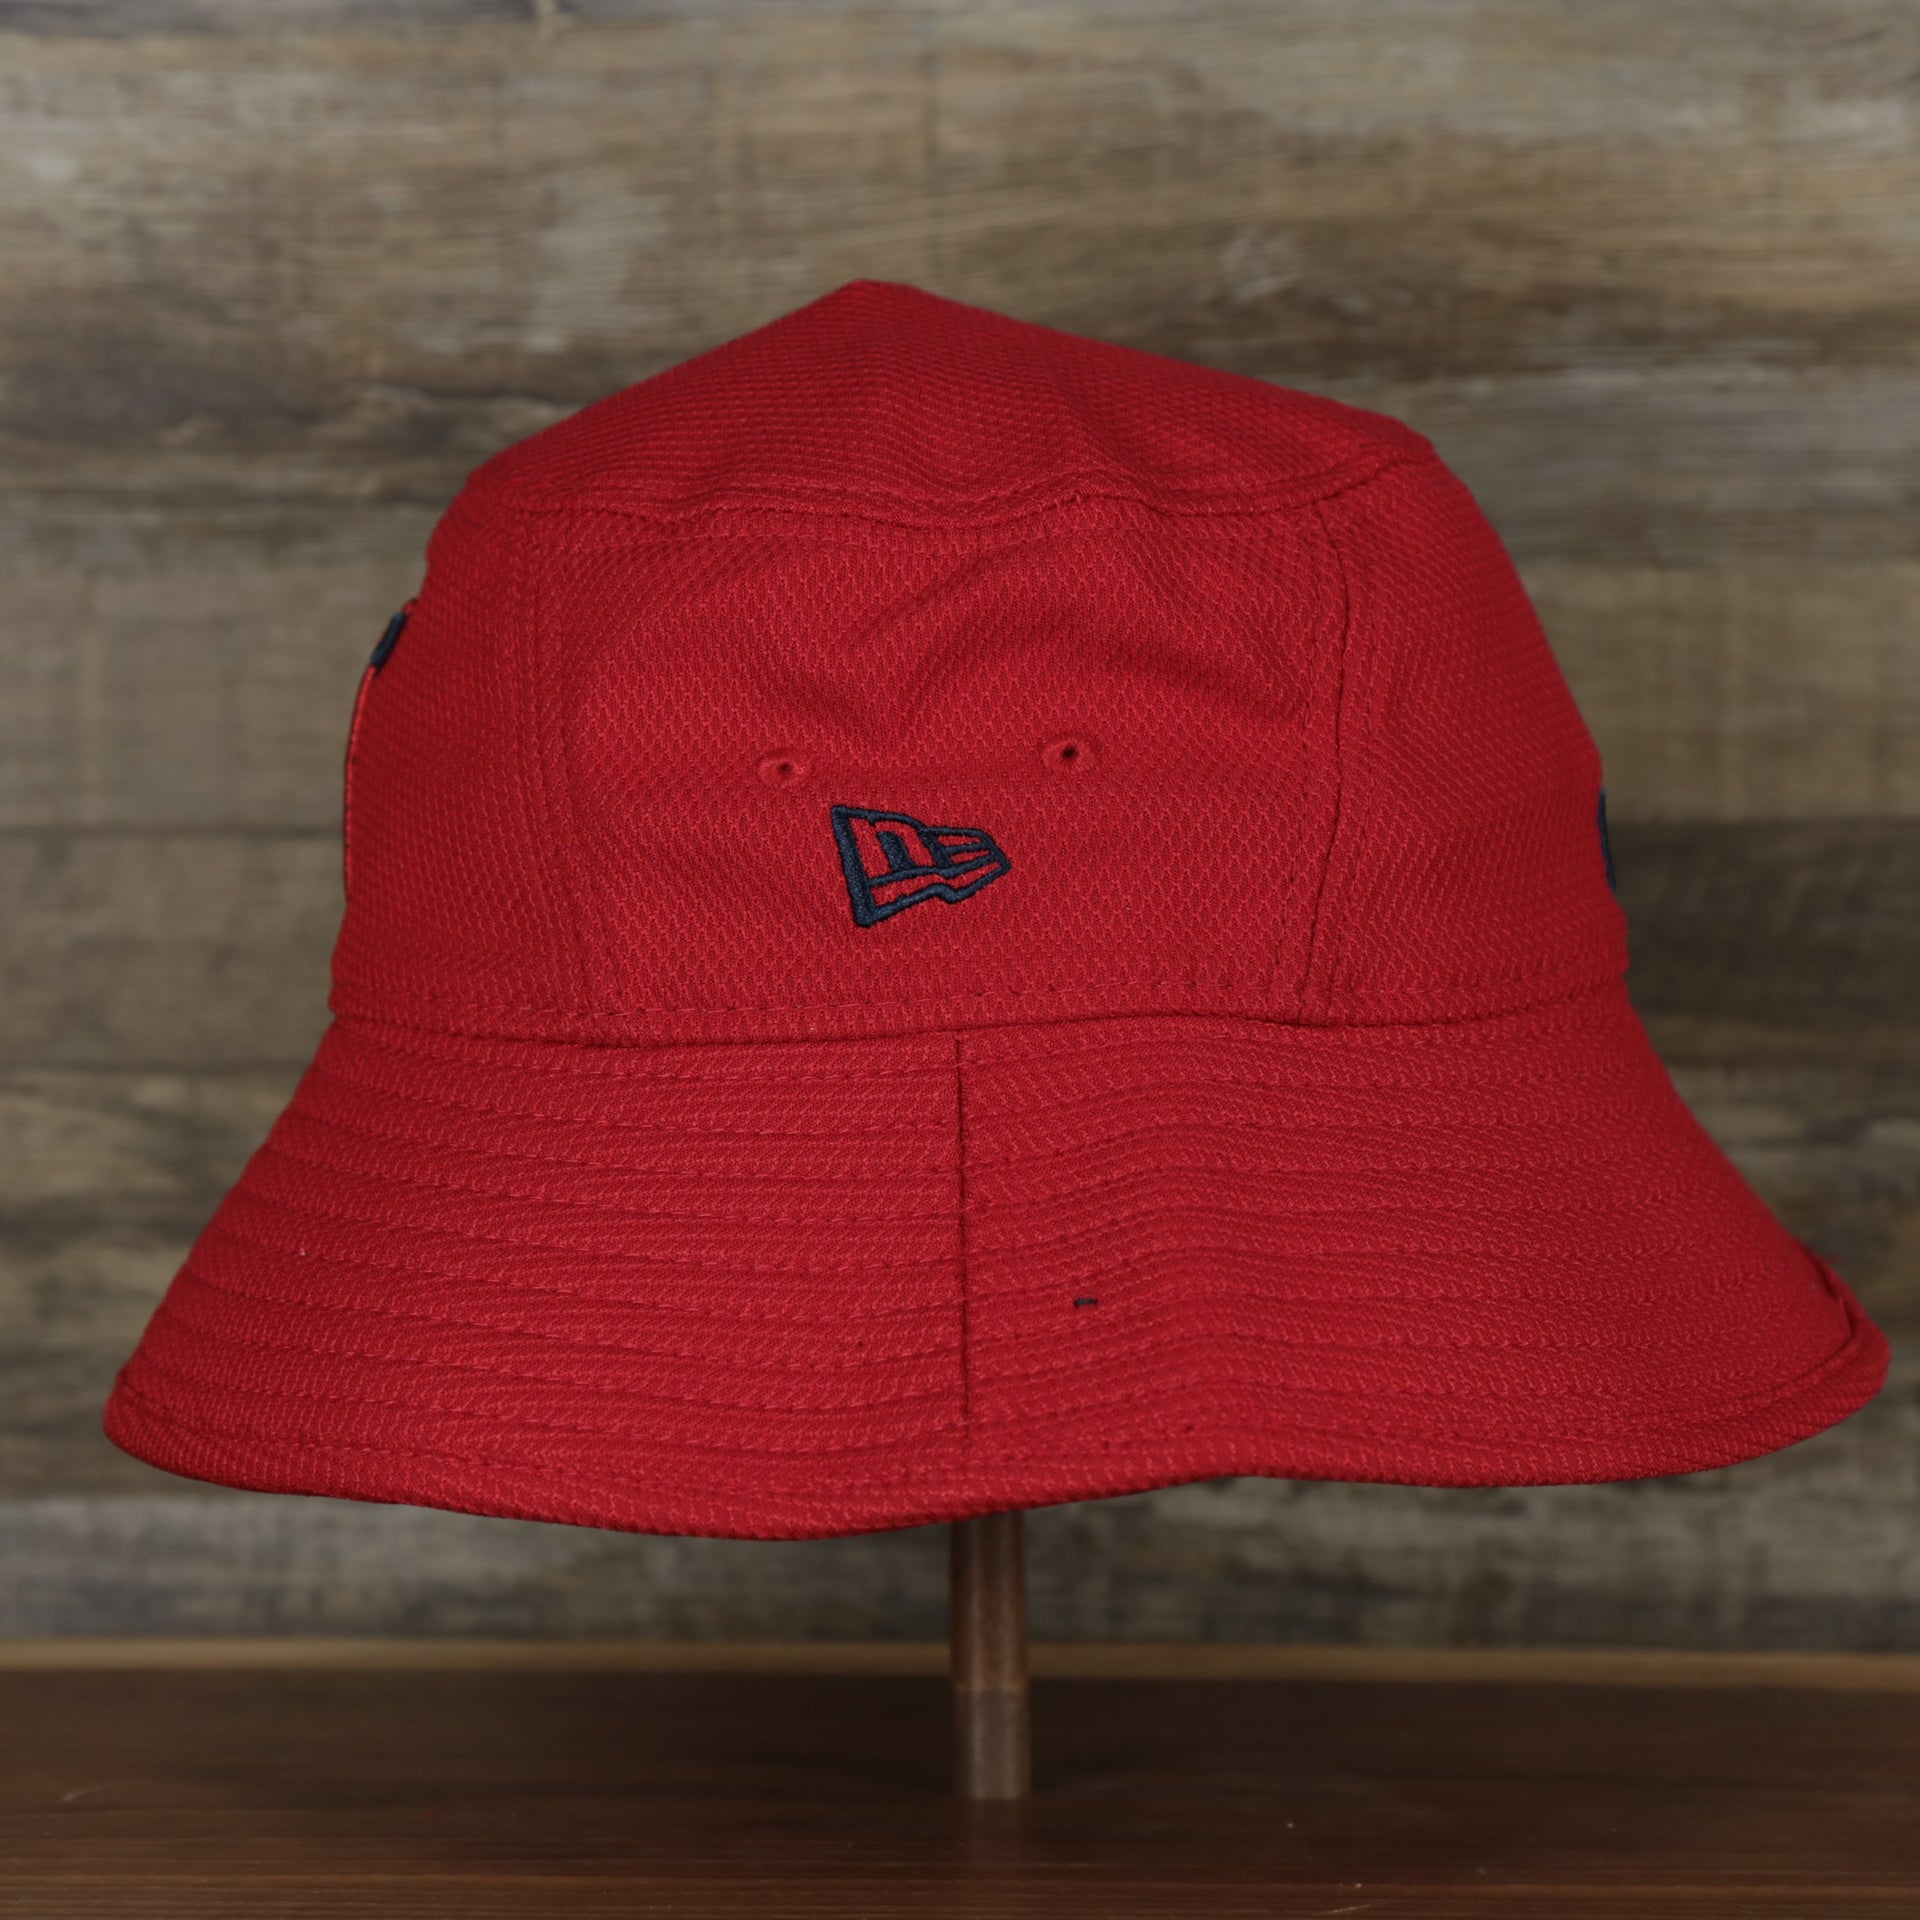 The wearer's left on the Anaheim Angels MLB 2022 Spring Training Onfield Bucket Hat